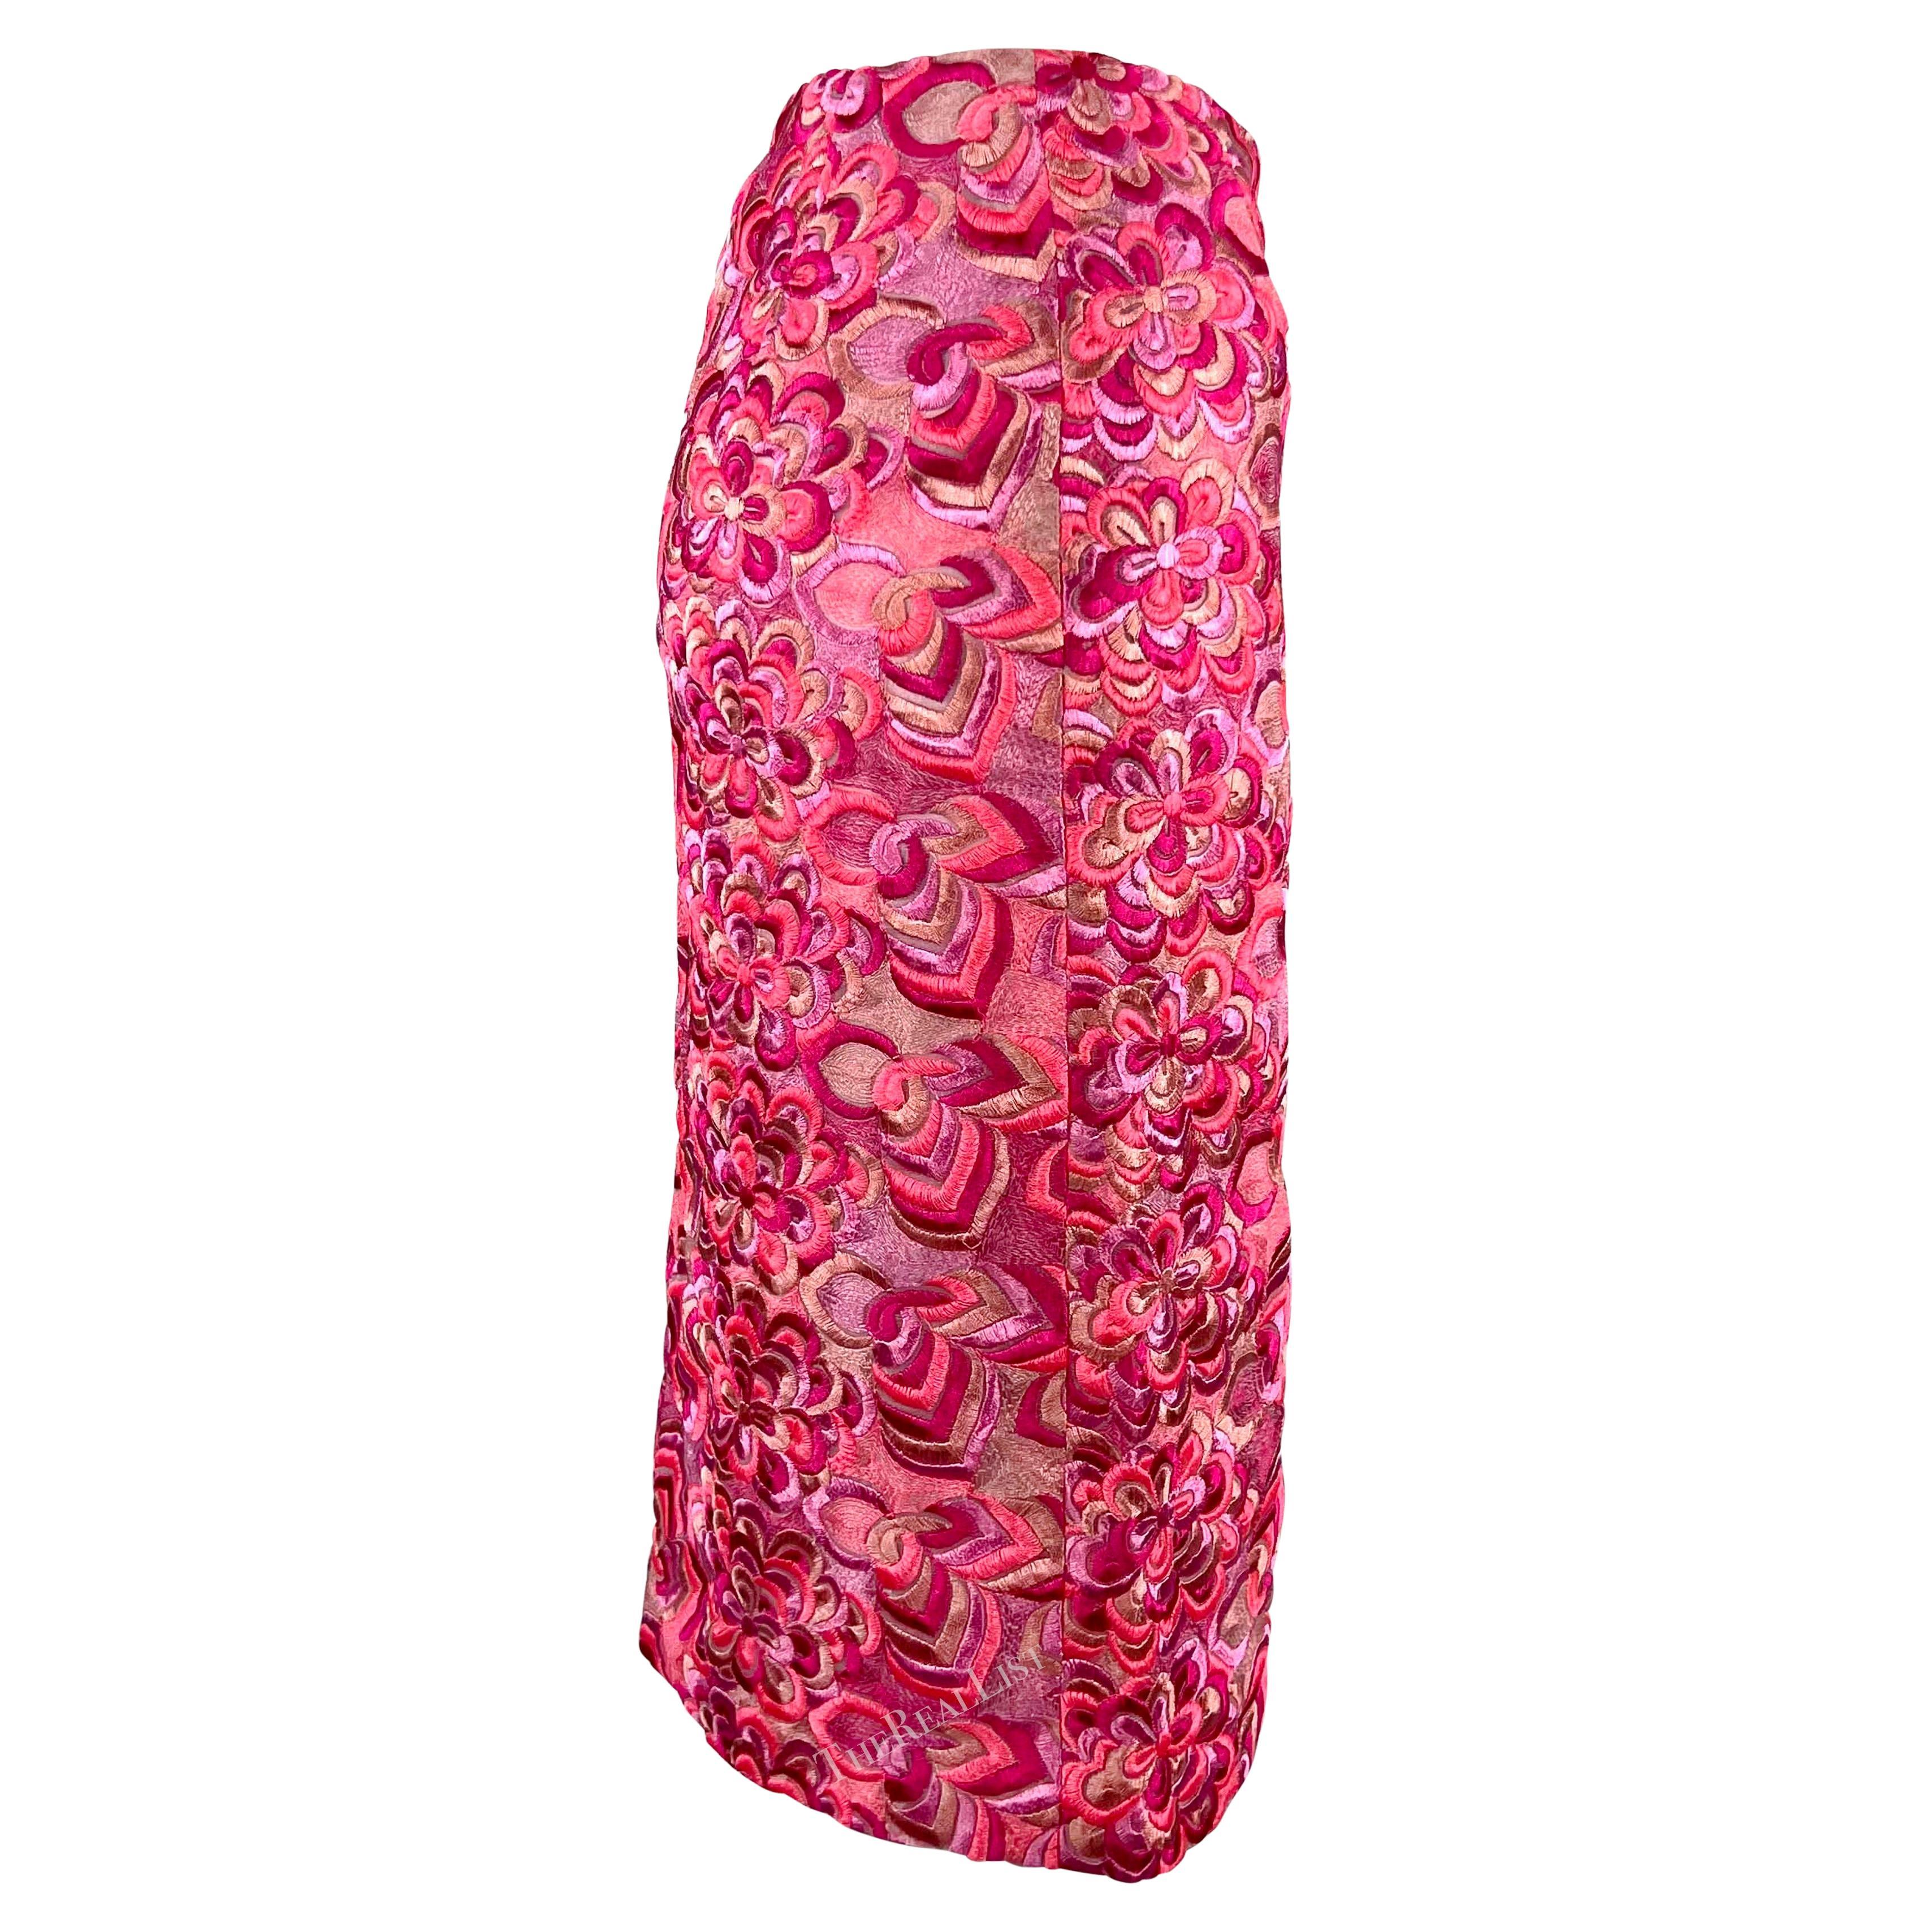 S/S 2000 Gianni Versace by Donatella Neon Pink Floral Embroidered Skirt For Sale 2